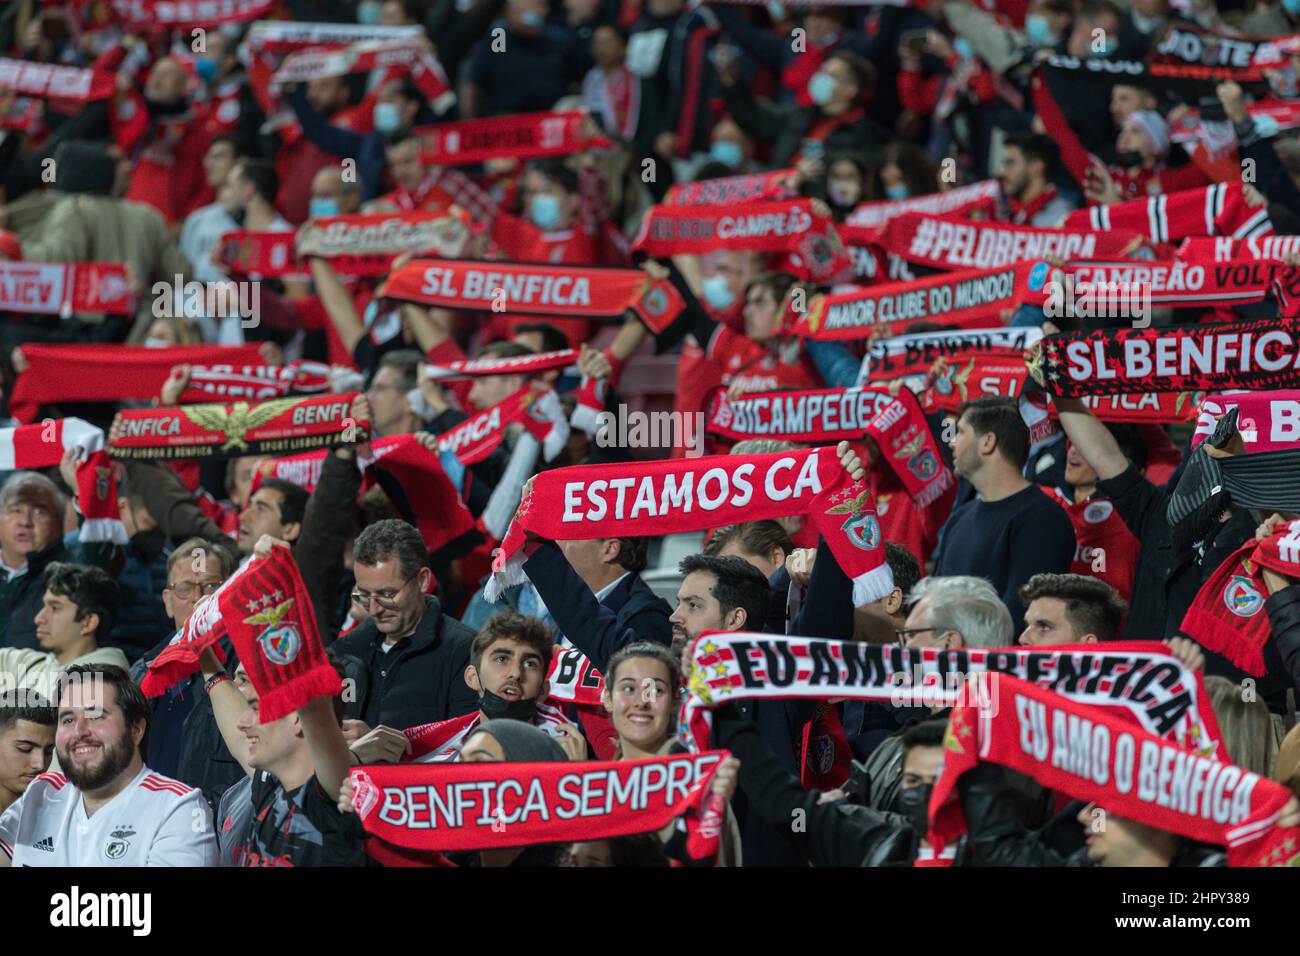 February 23, 2022. Lisbon, Portugal. Benfica supporters during the game of  the 1st Leg of Round of 16 for the UEFA Champions League, Benfica vs Ajax  Credit: Alexandre de Sousa/Alamy Live News